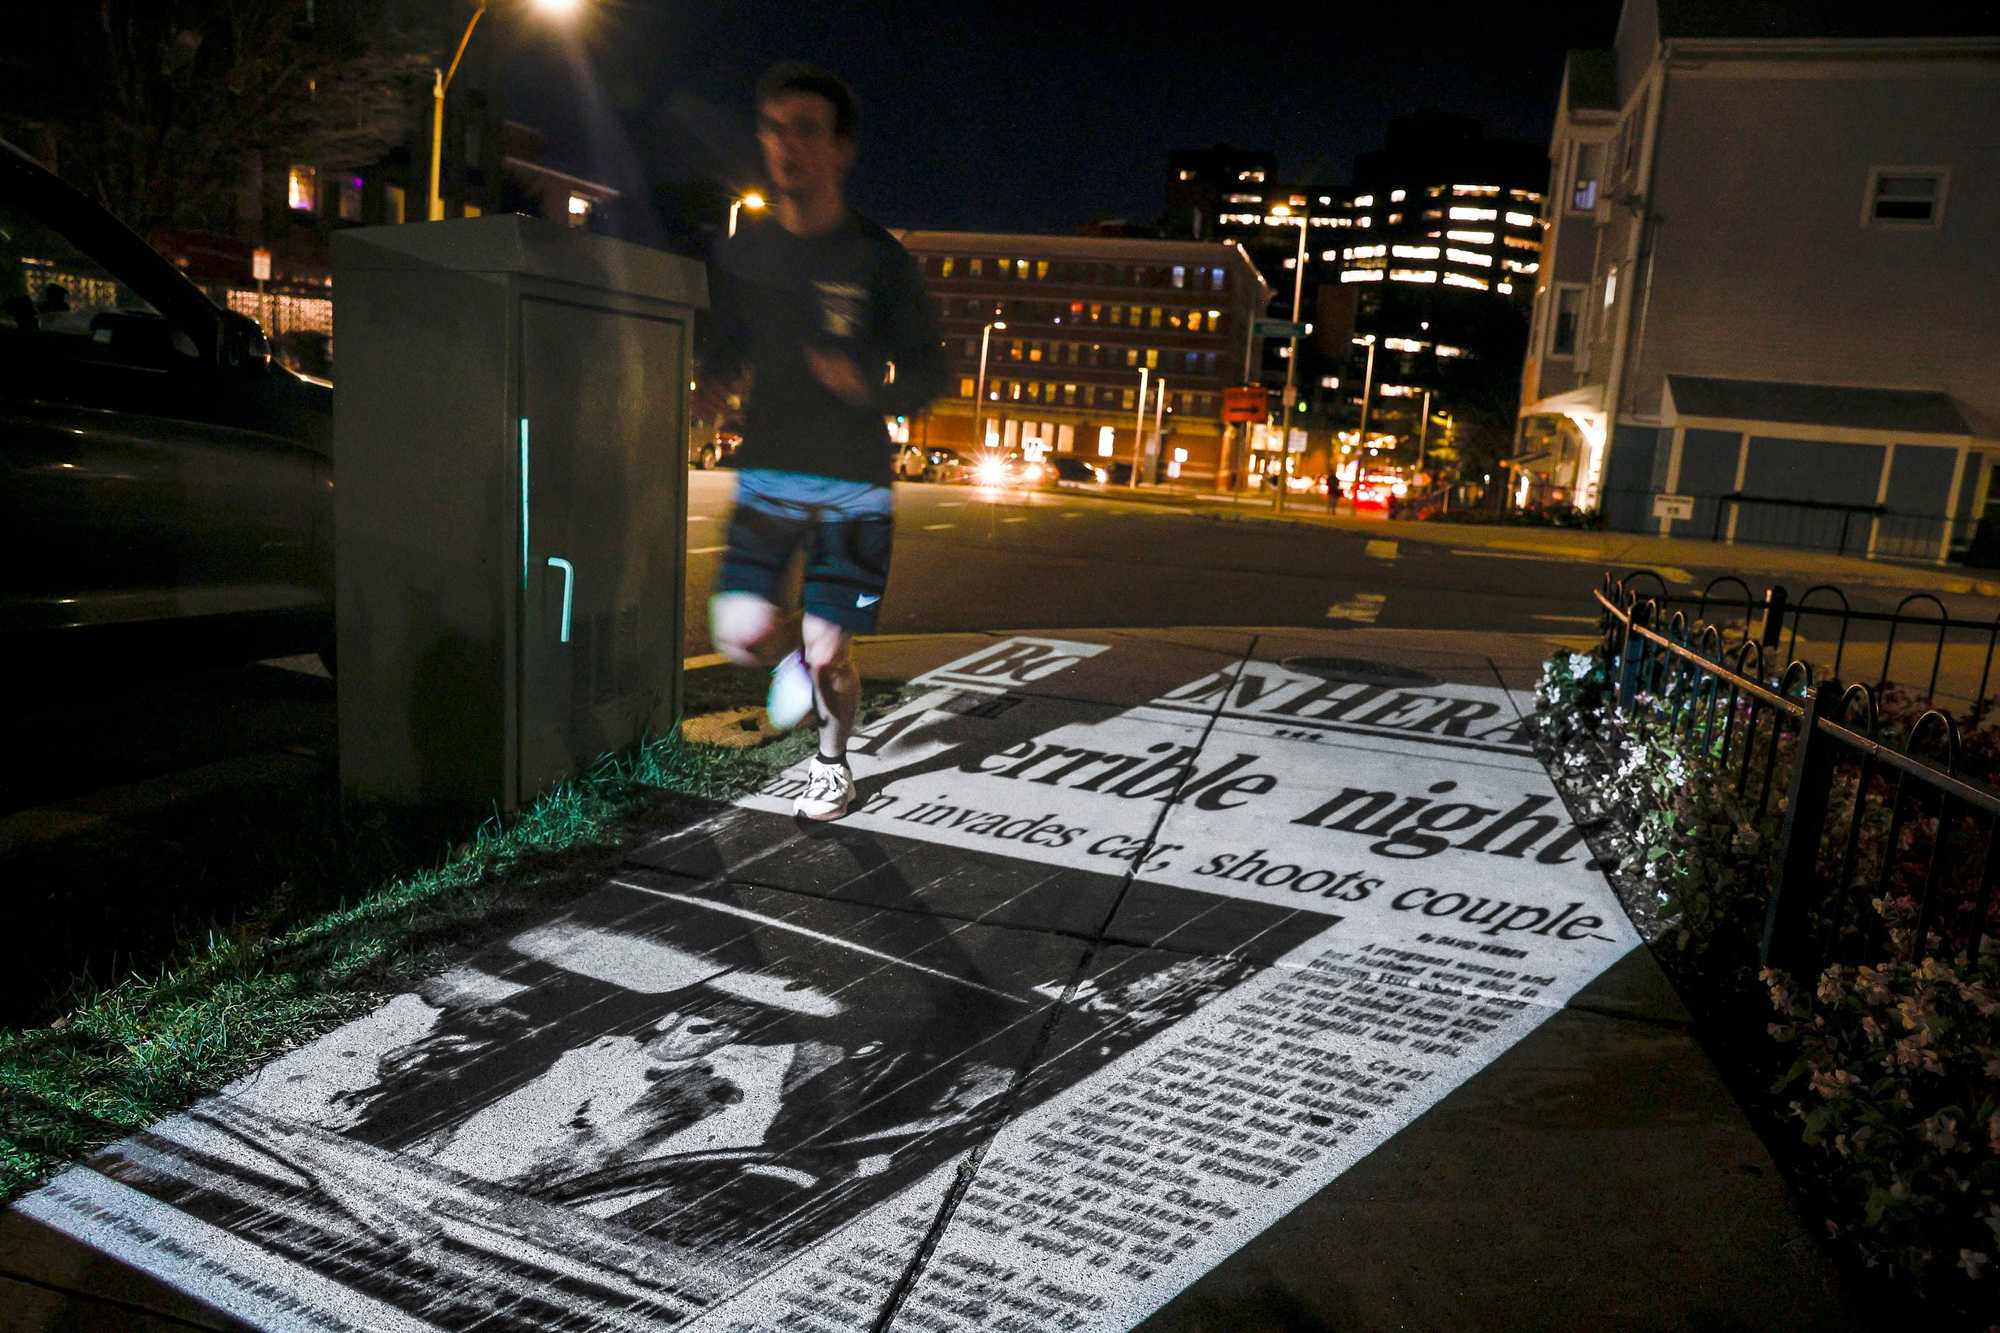 A projection of the Boston Herald’s front page from Oct. 24, 1989, the morning after the Stuart shooting, is cast on the ground as a jogger passes through the intersection of St. Alphonsus Street and Horadan Way. Police found Carol and Charles Stuart shot in their car nearby.